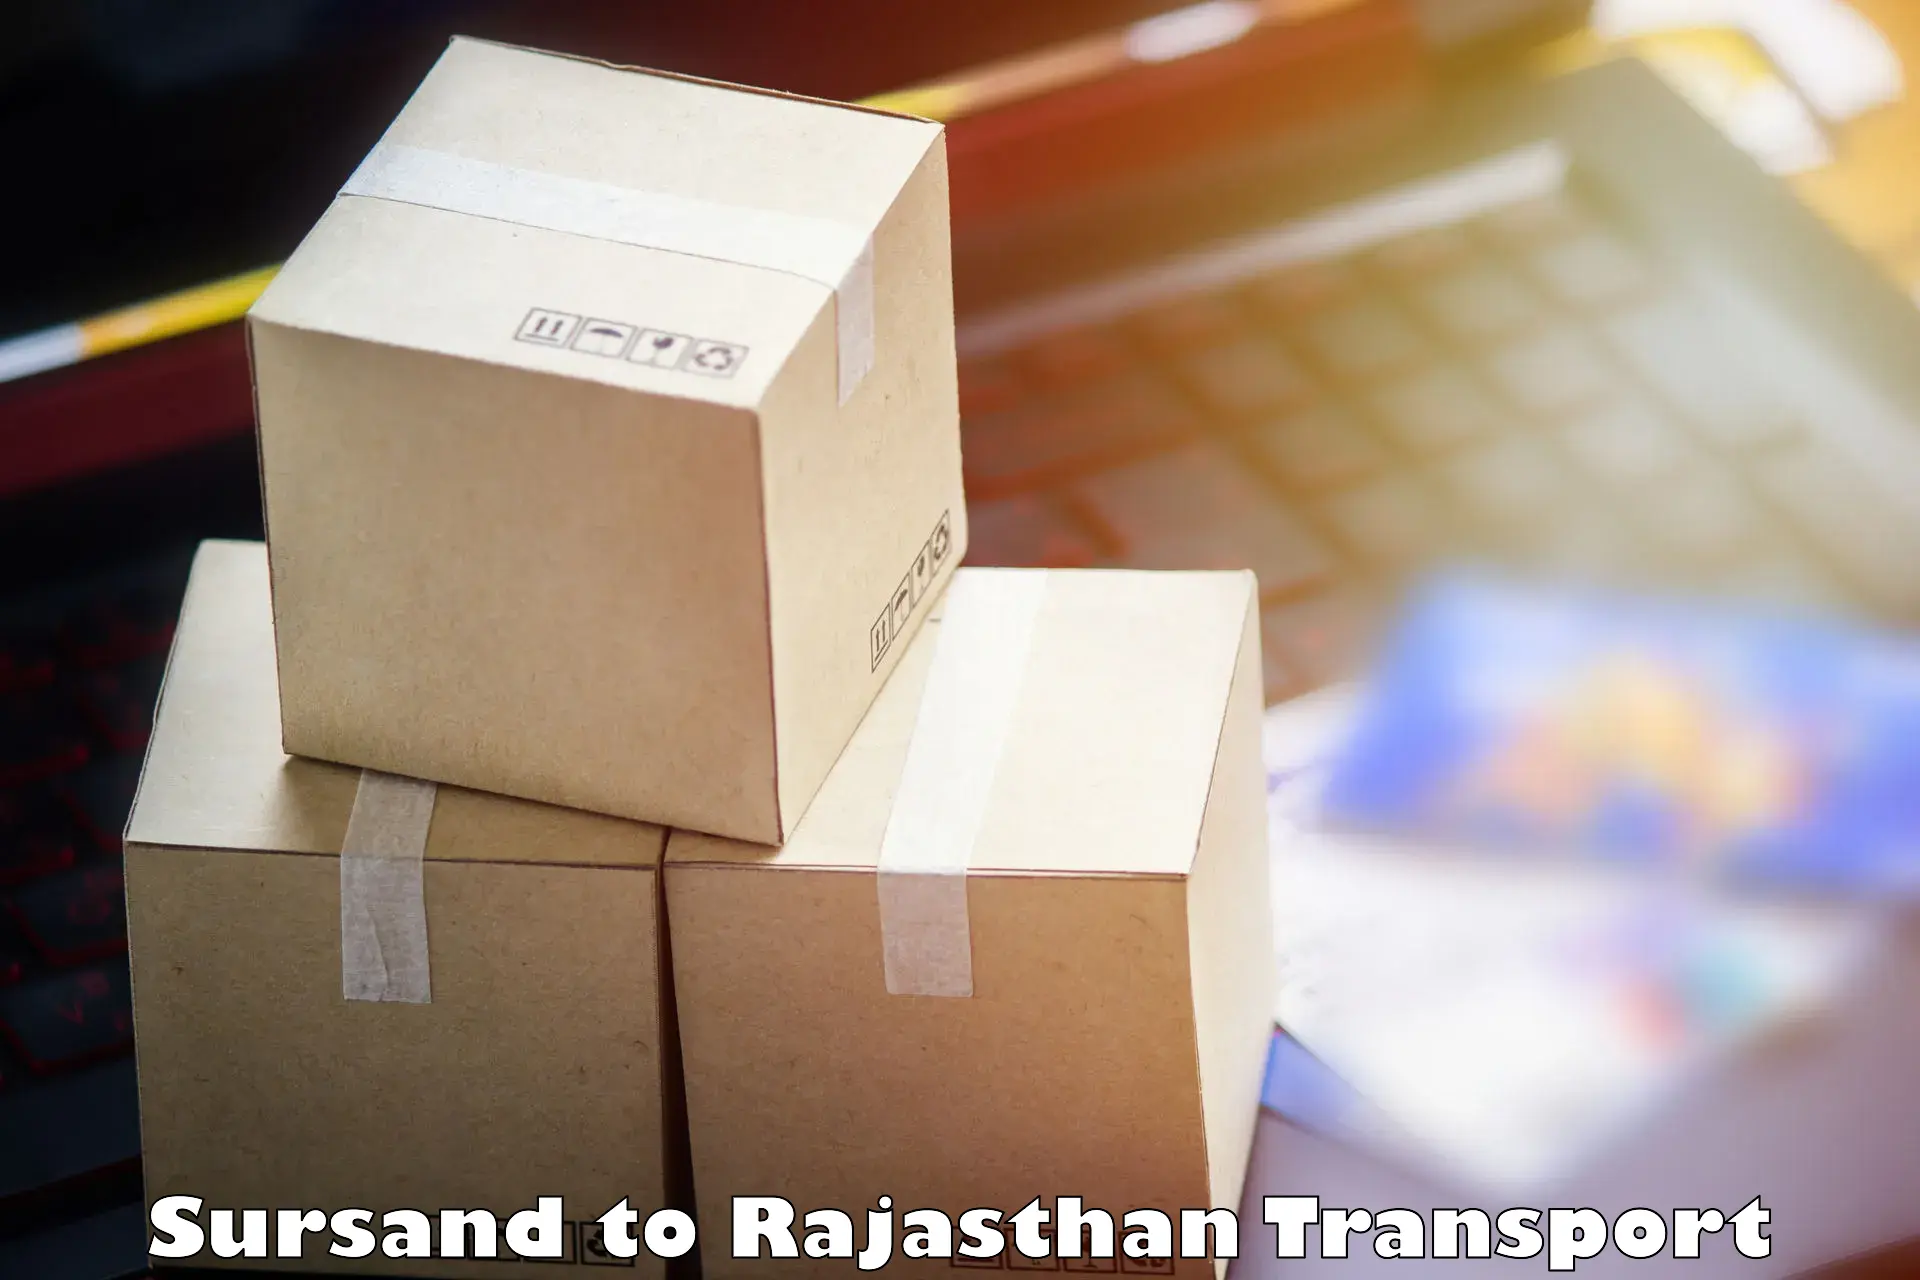 Truck transport companies in India in Sursand to Alwar